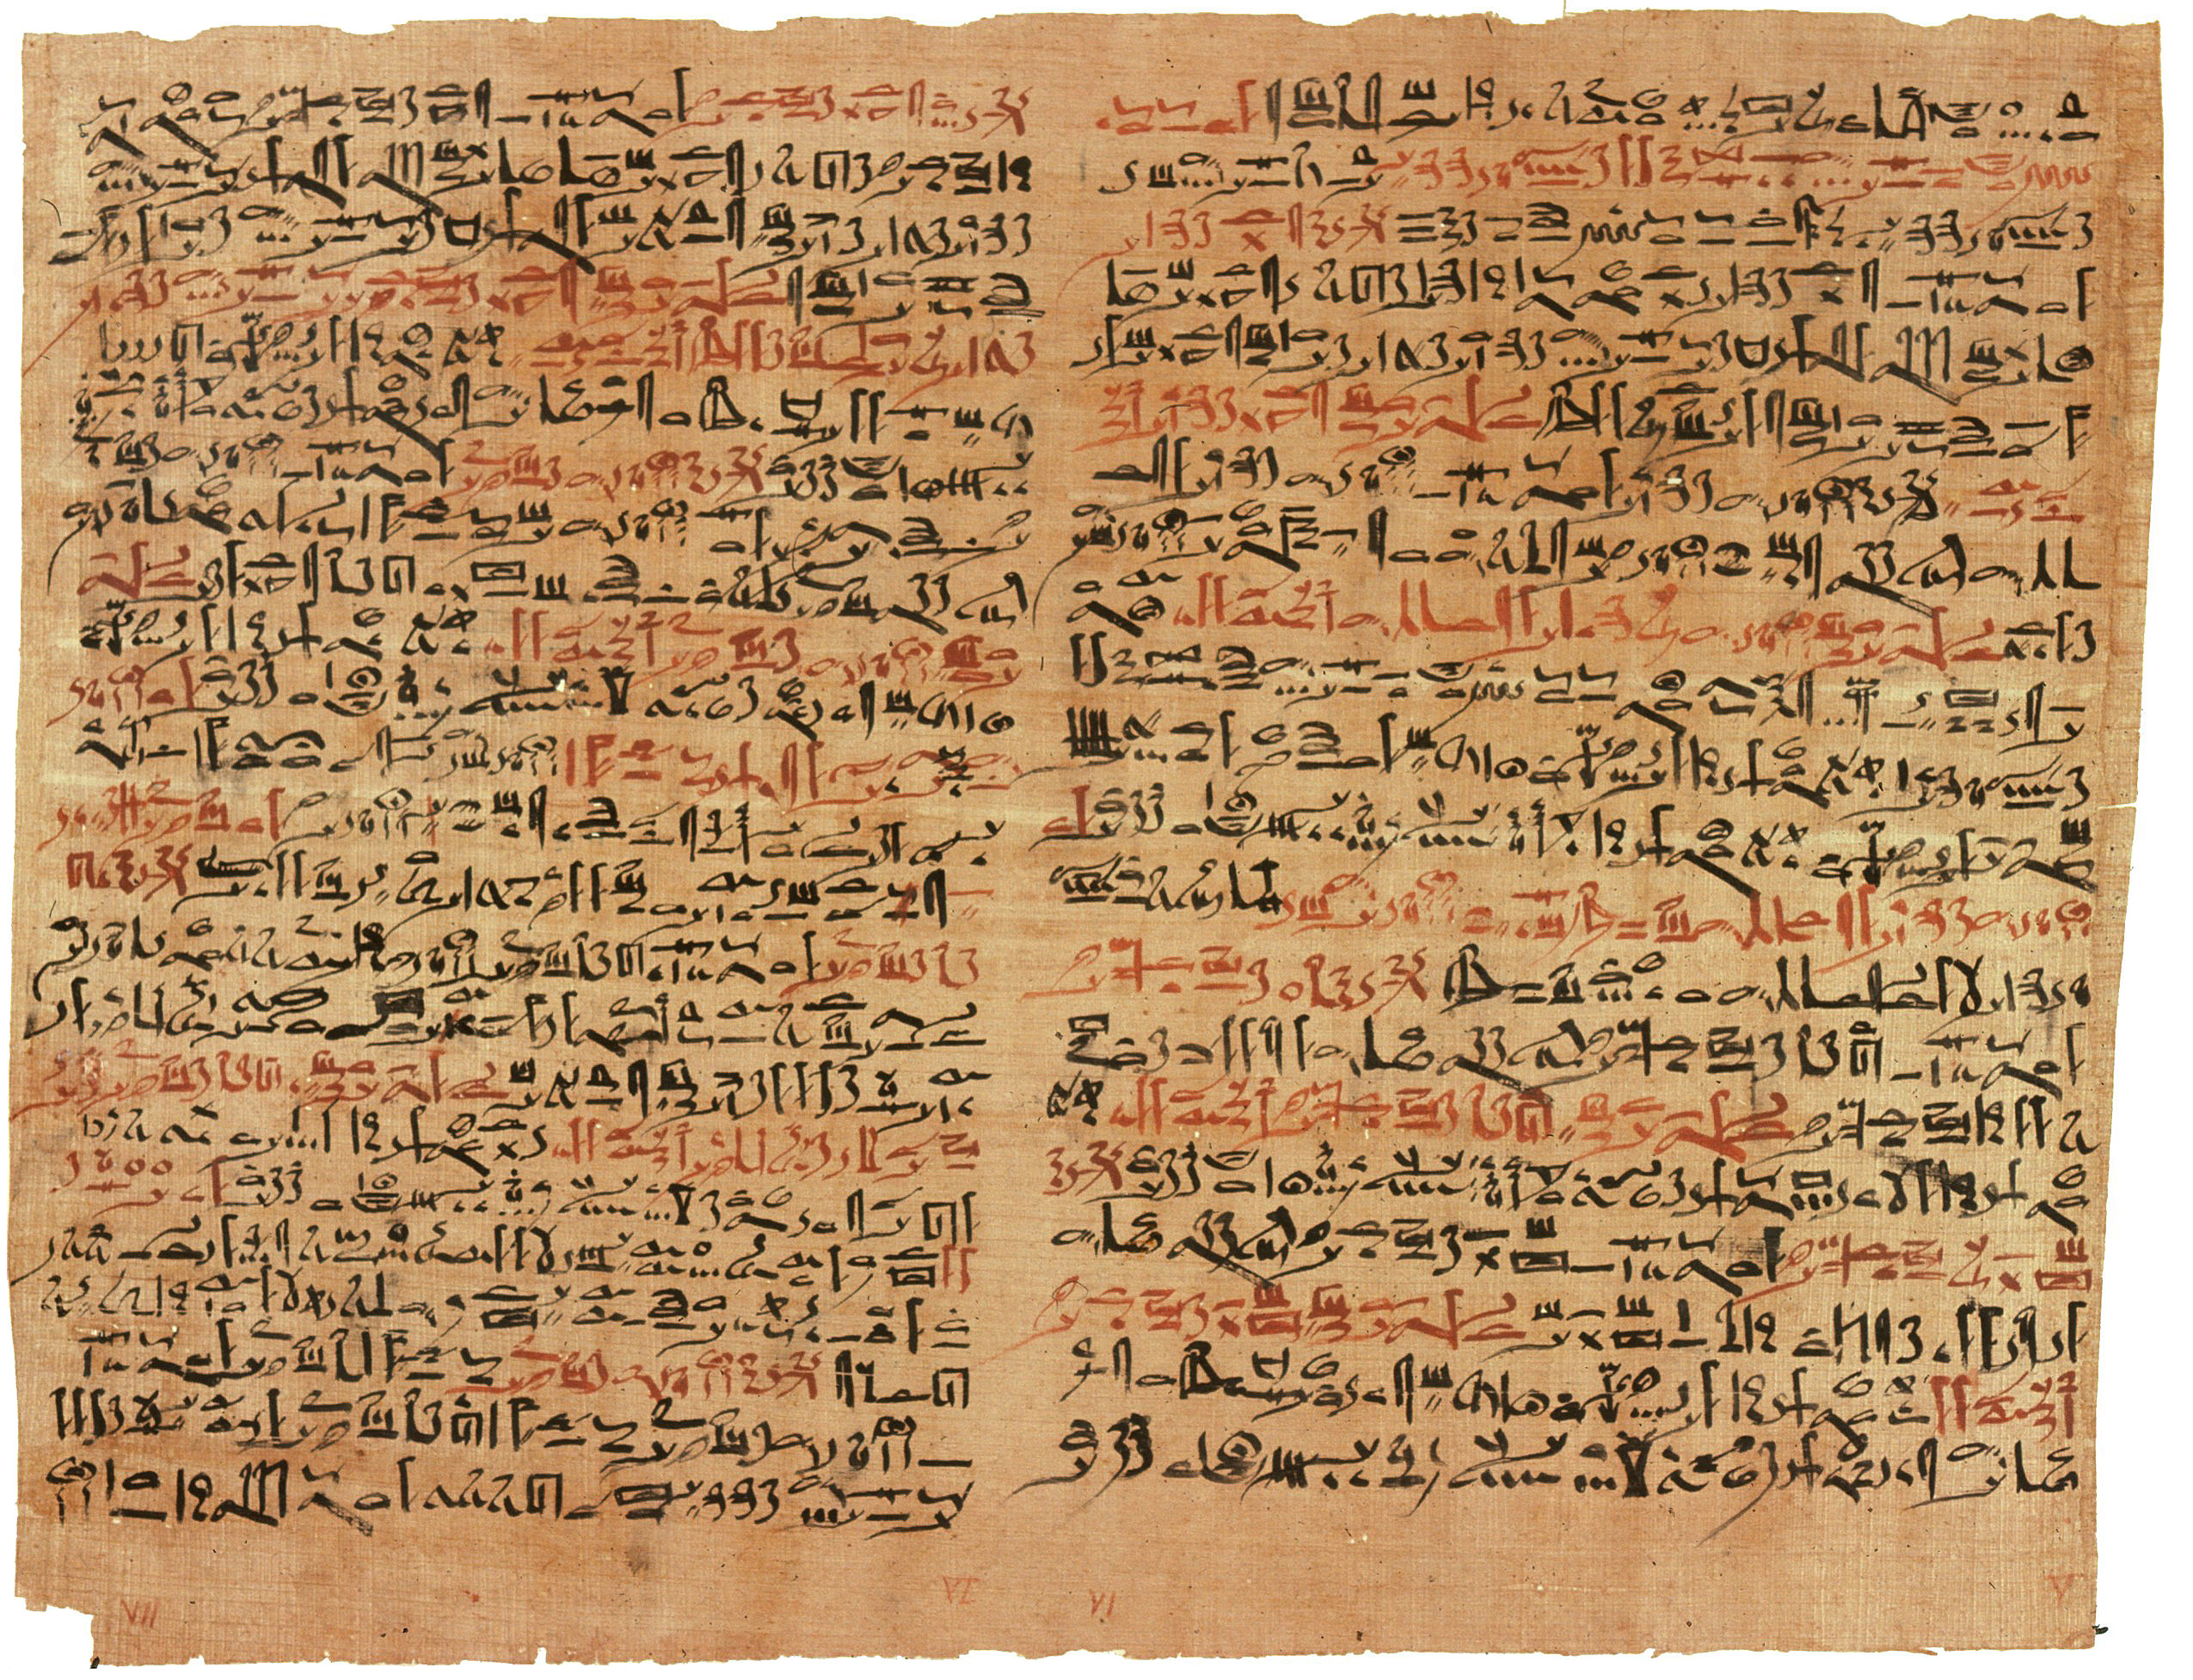 Image of papyrus paper that is old, brown, and worn. The text is written in two columns in black and red ink.